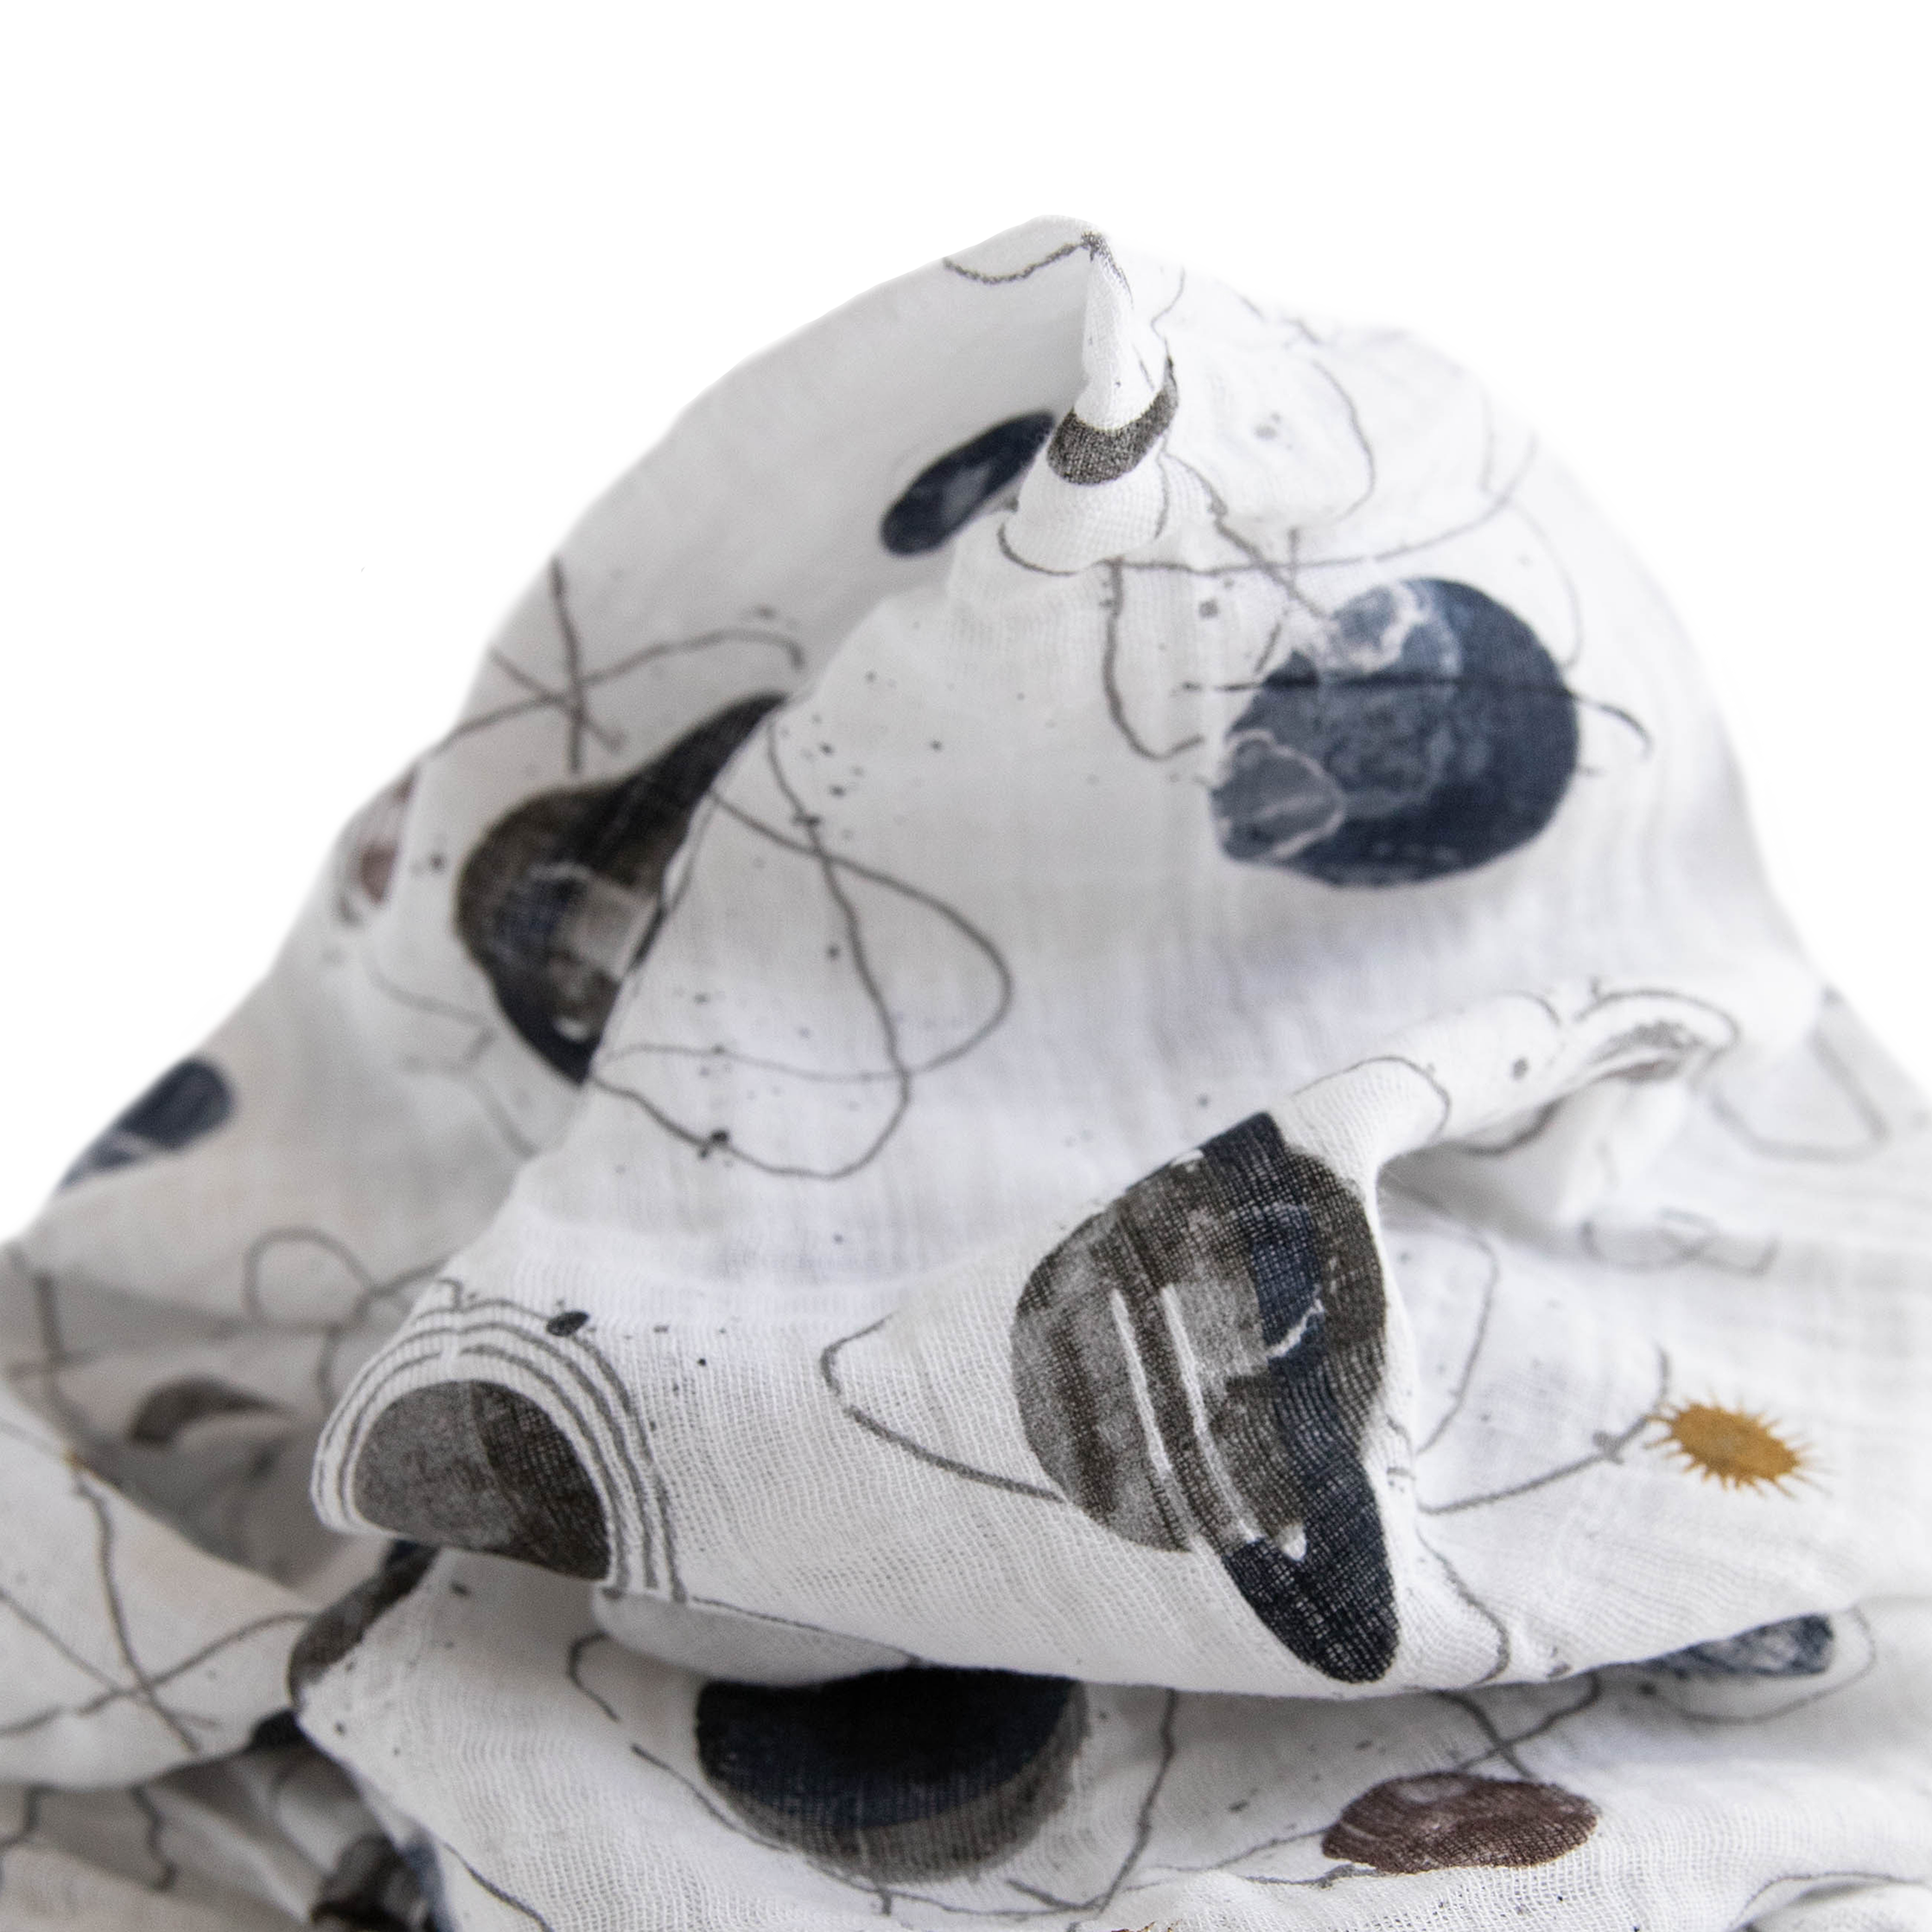 Cotton Muslin Swaddle Blanket - Planetary